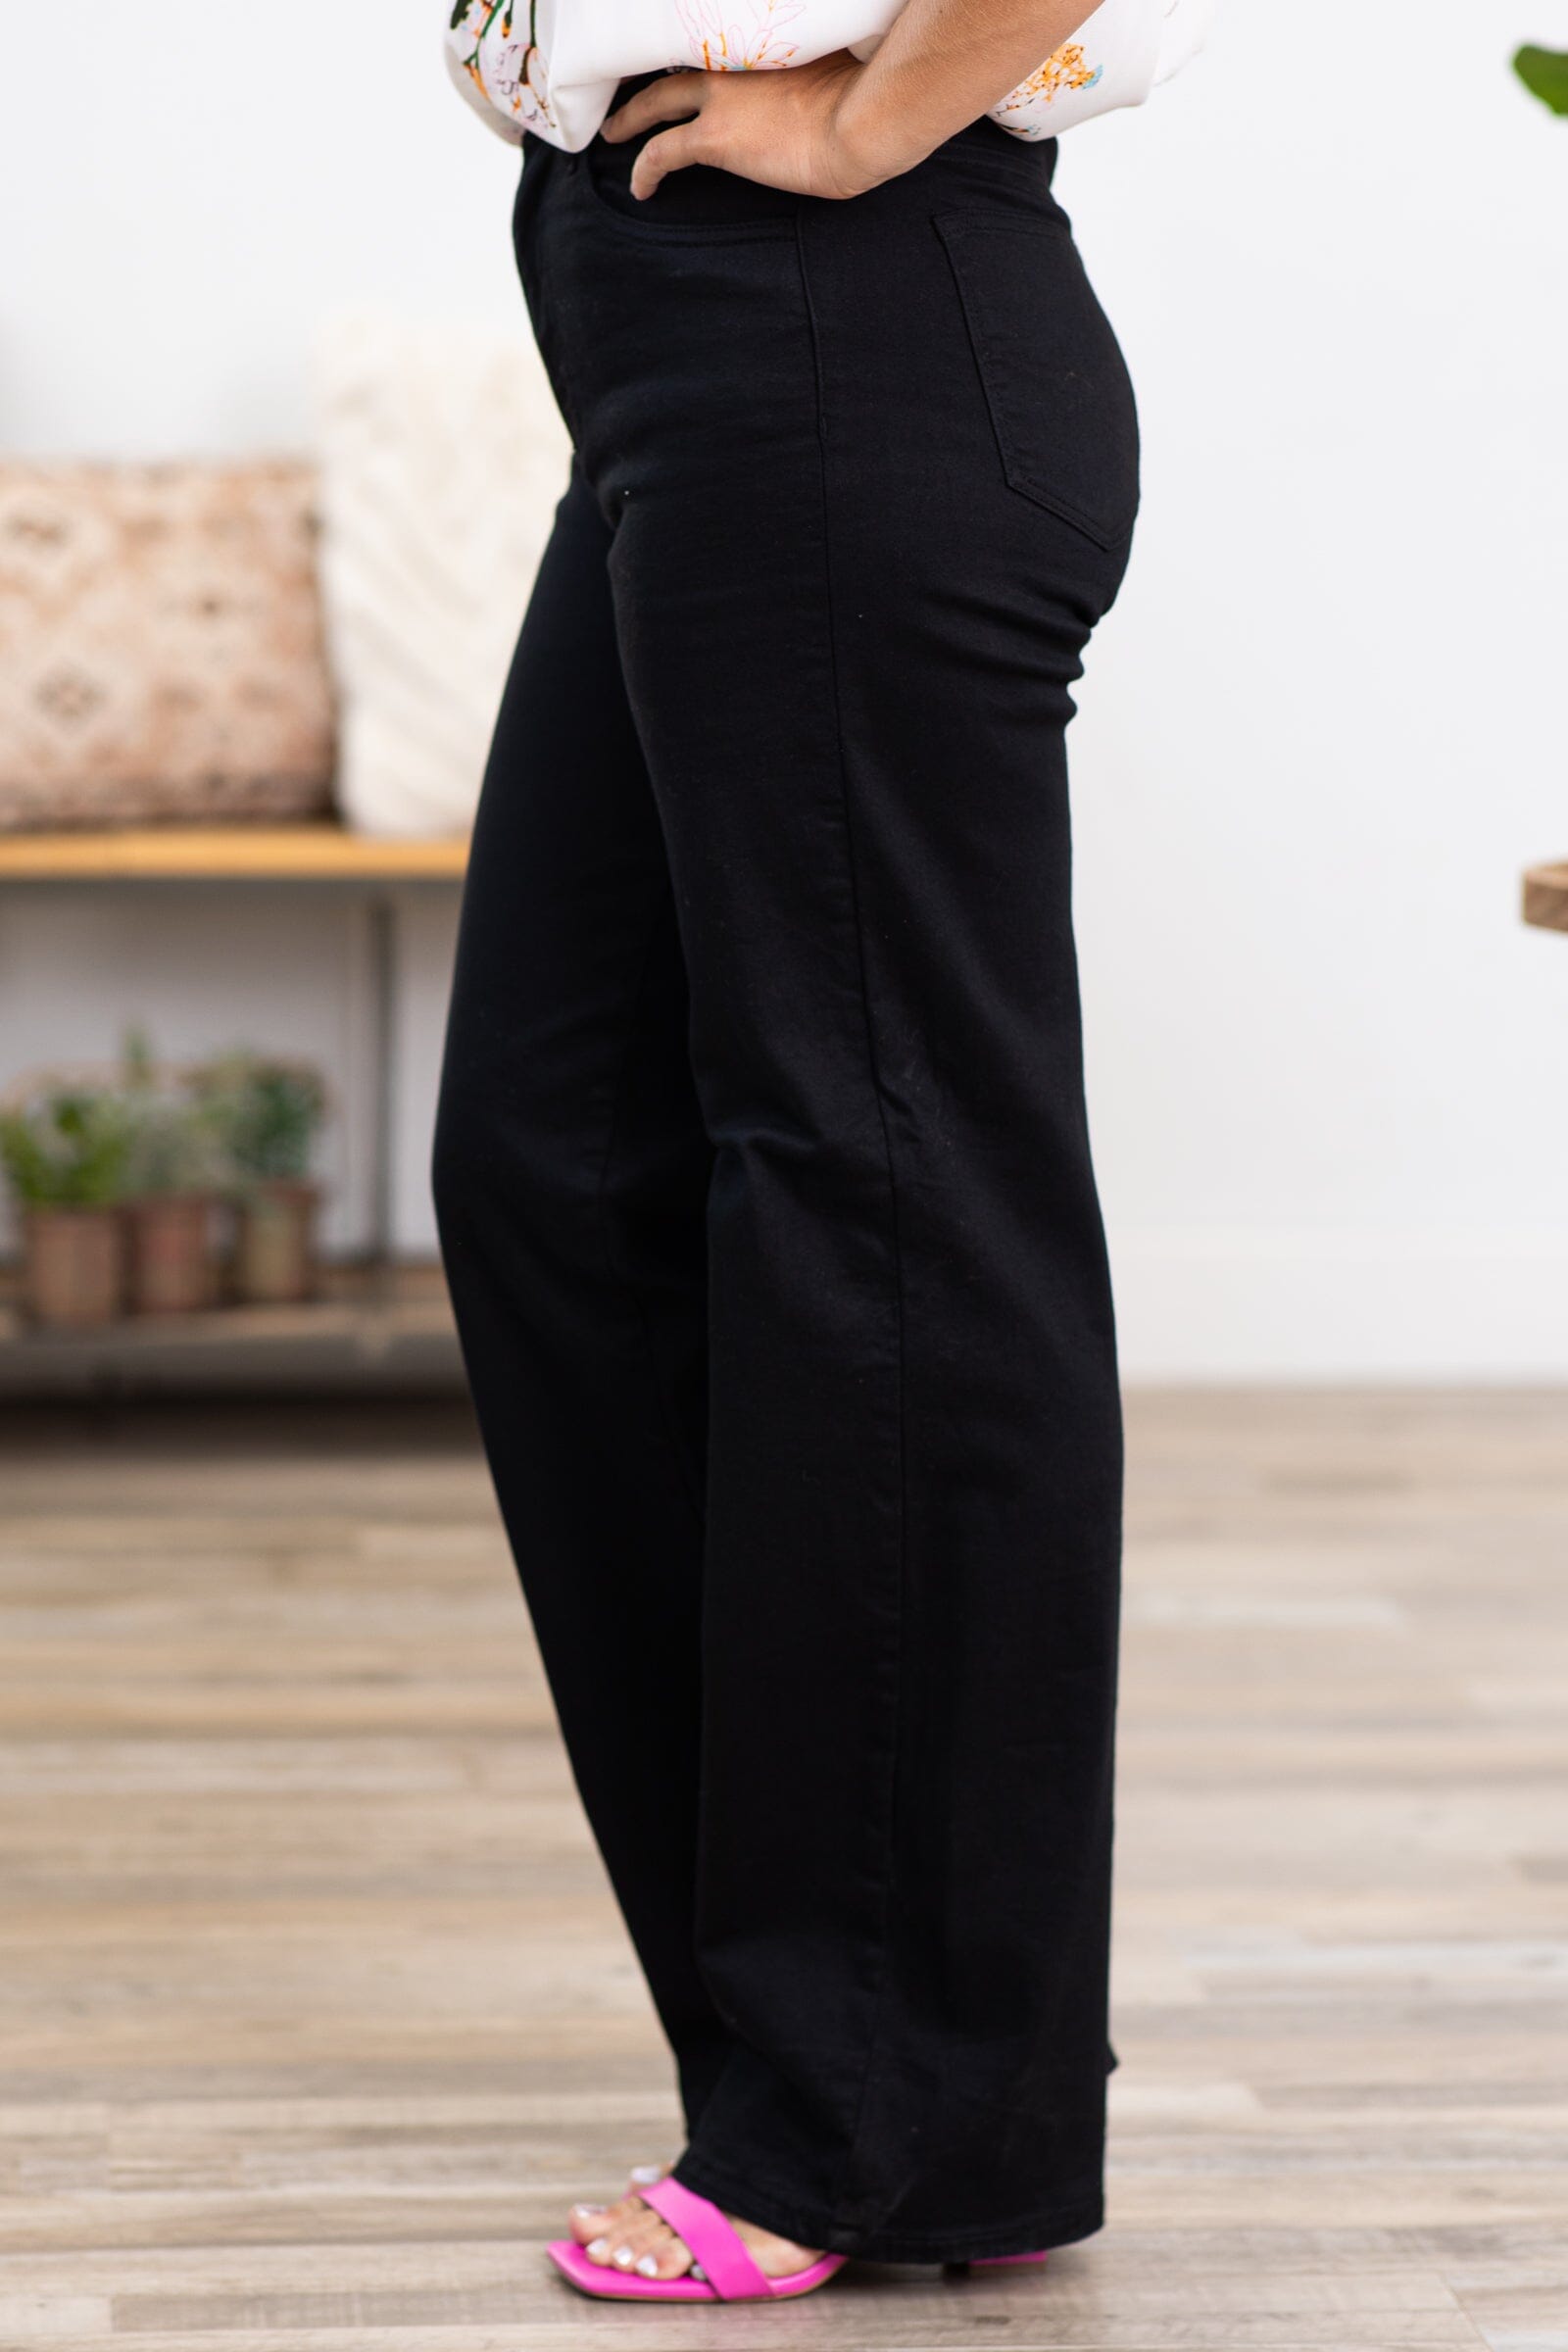 Black Wide Leg Pants With Stretch - Filly Flair